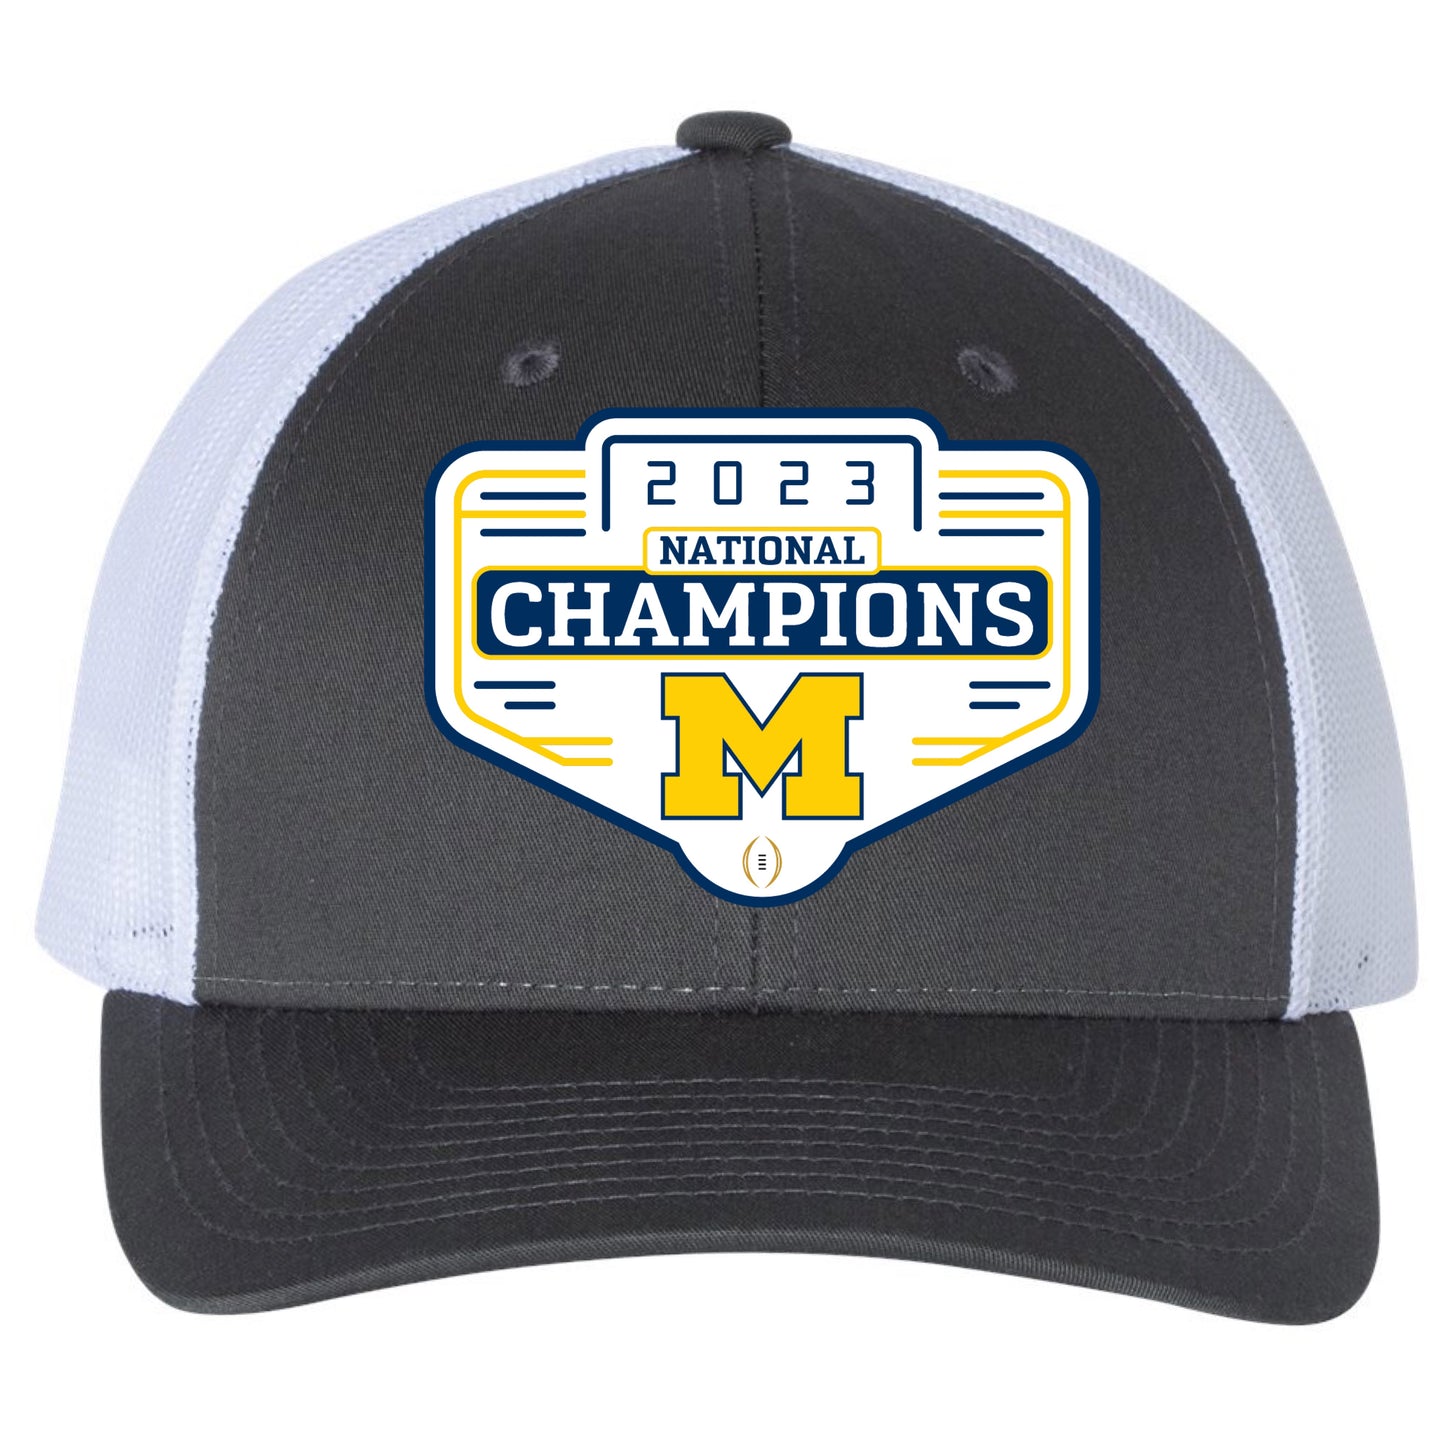 Michigan Wolverines 2023 National Champions 3D YP Snapback Trucker Hat- Charcoal/ White - Ten Gallon Hat Co.